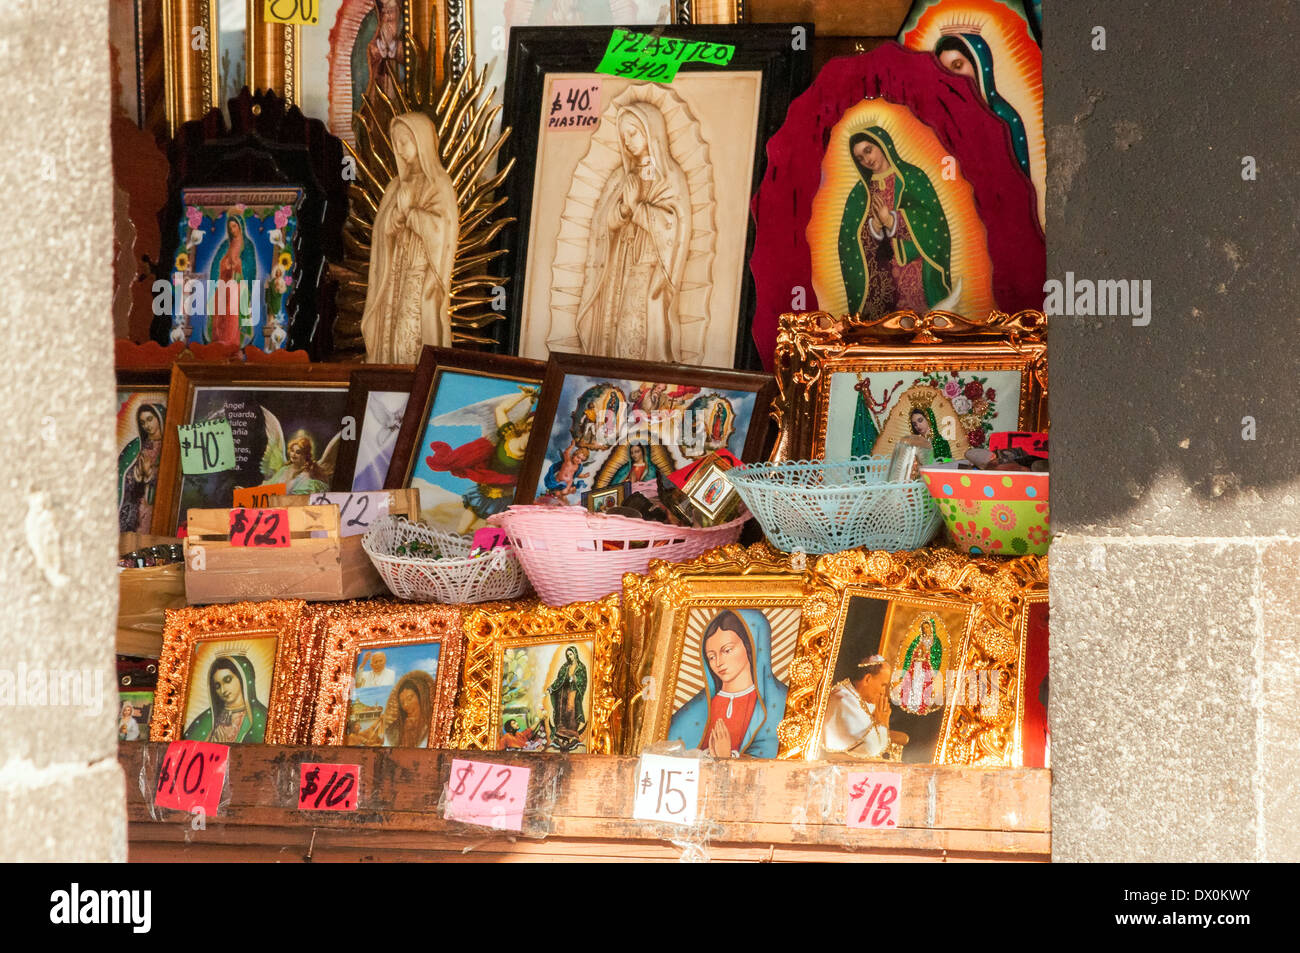 Religious souvenirs for sale in the Basilica of our Lady of Guadalupe in Mexico City Stock Photo